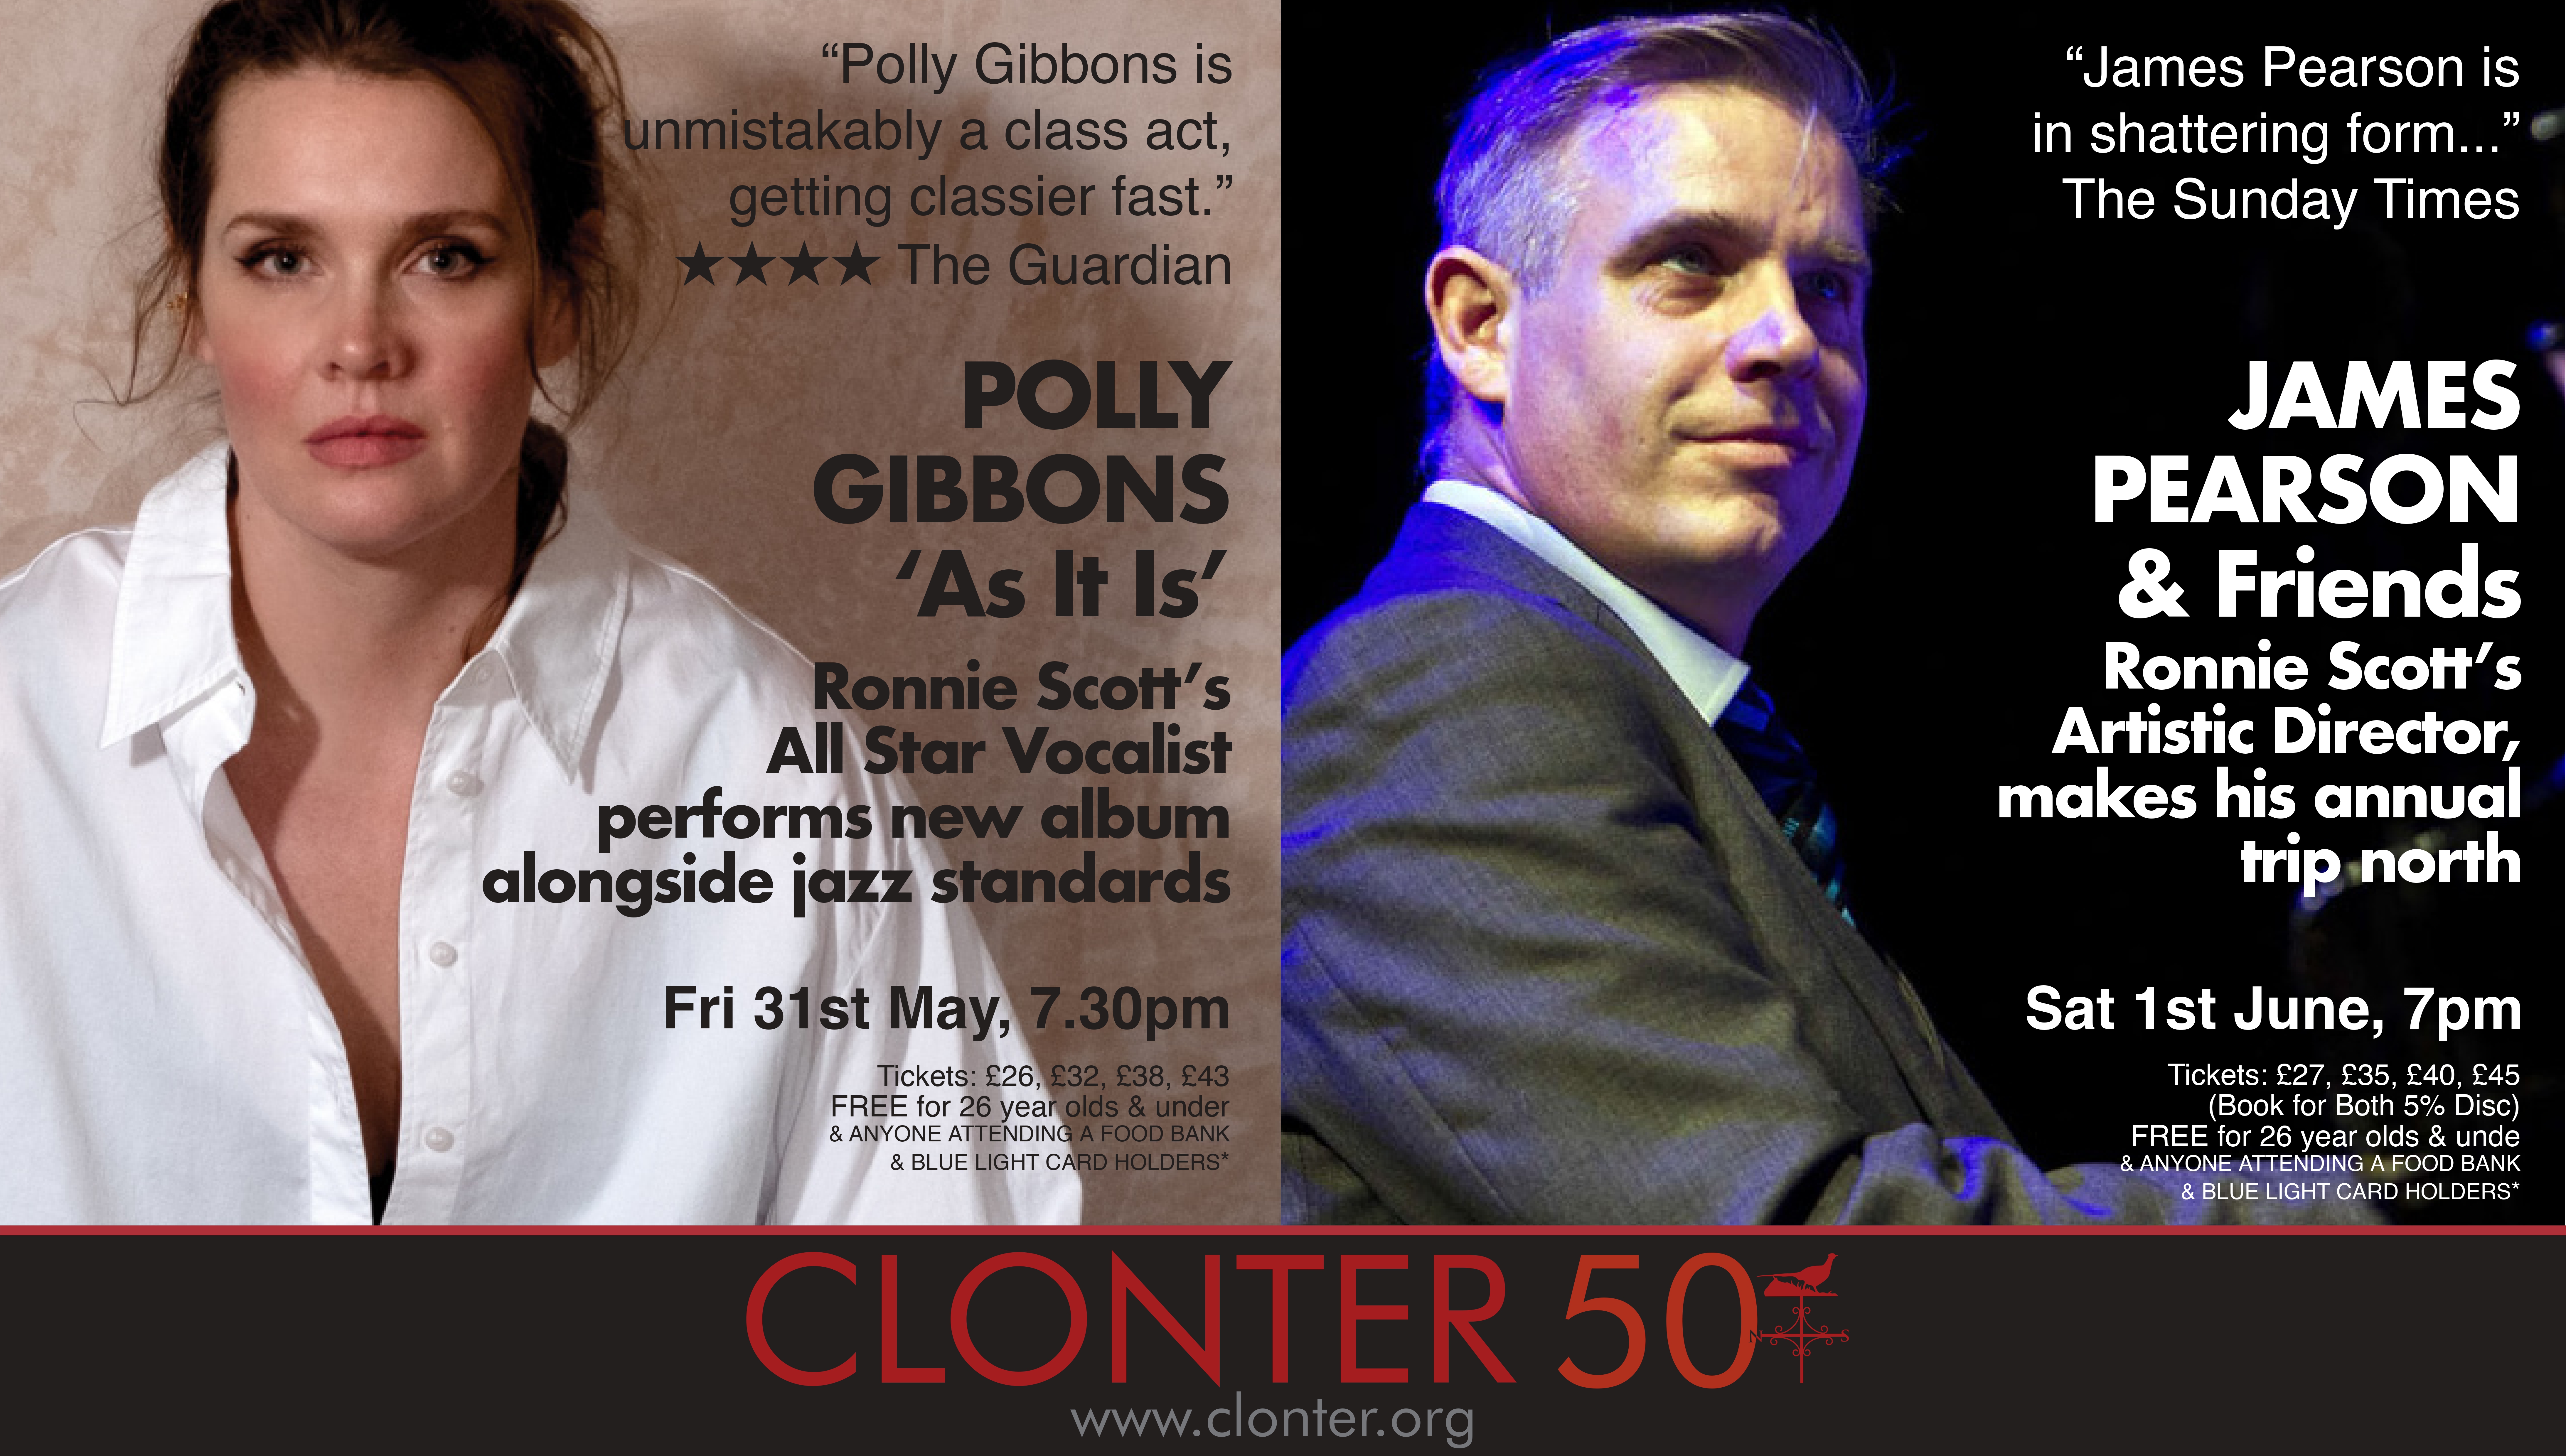 A promotional poster split into two panels. The left features Polly Gibbons with quotes praising her music and details of her performance on Fri 31st May, 7:30 pm. The right features James Pearson with event details for Sat 1st June, 7 pm. Both events at Clonter.